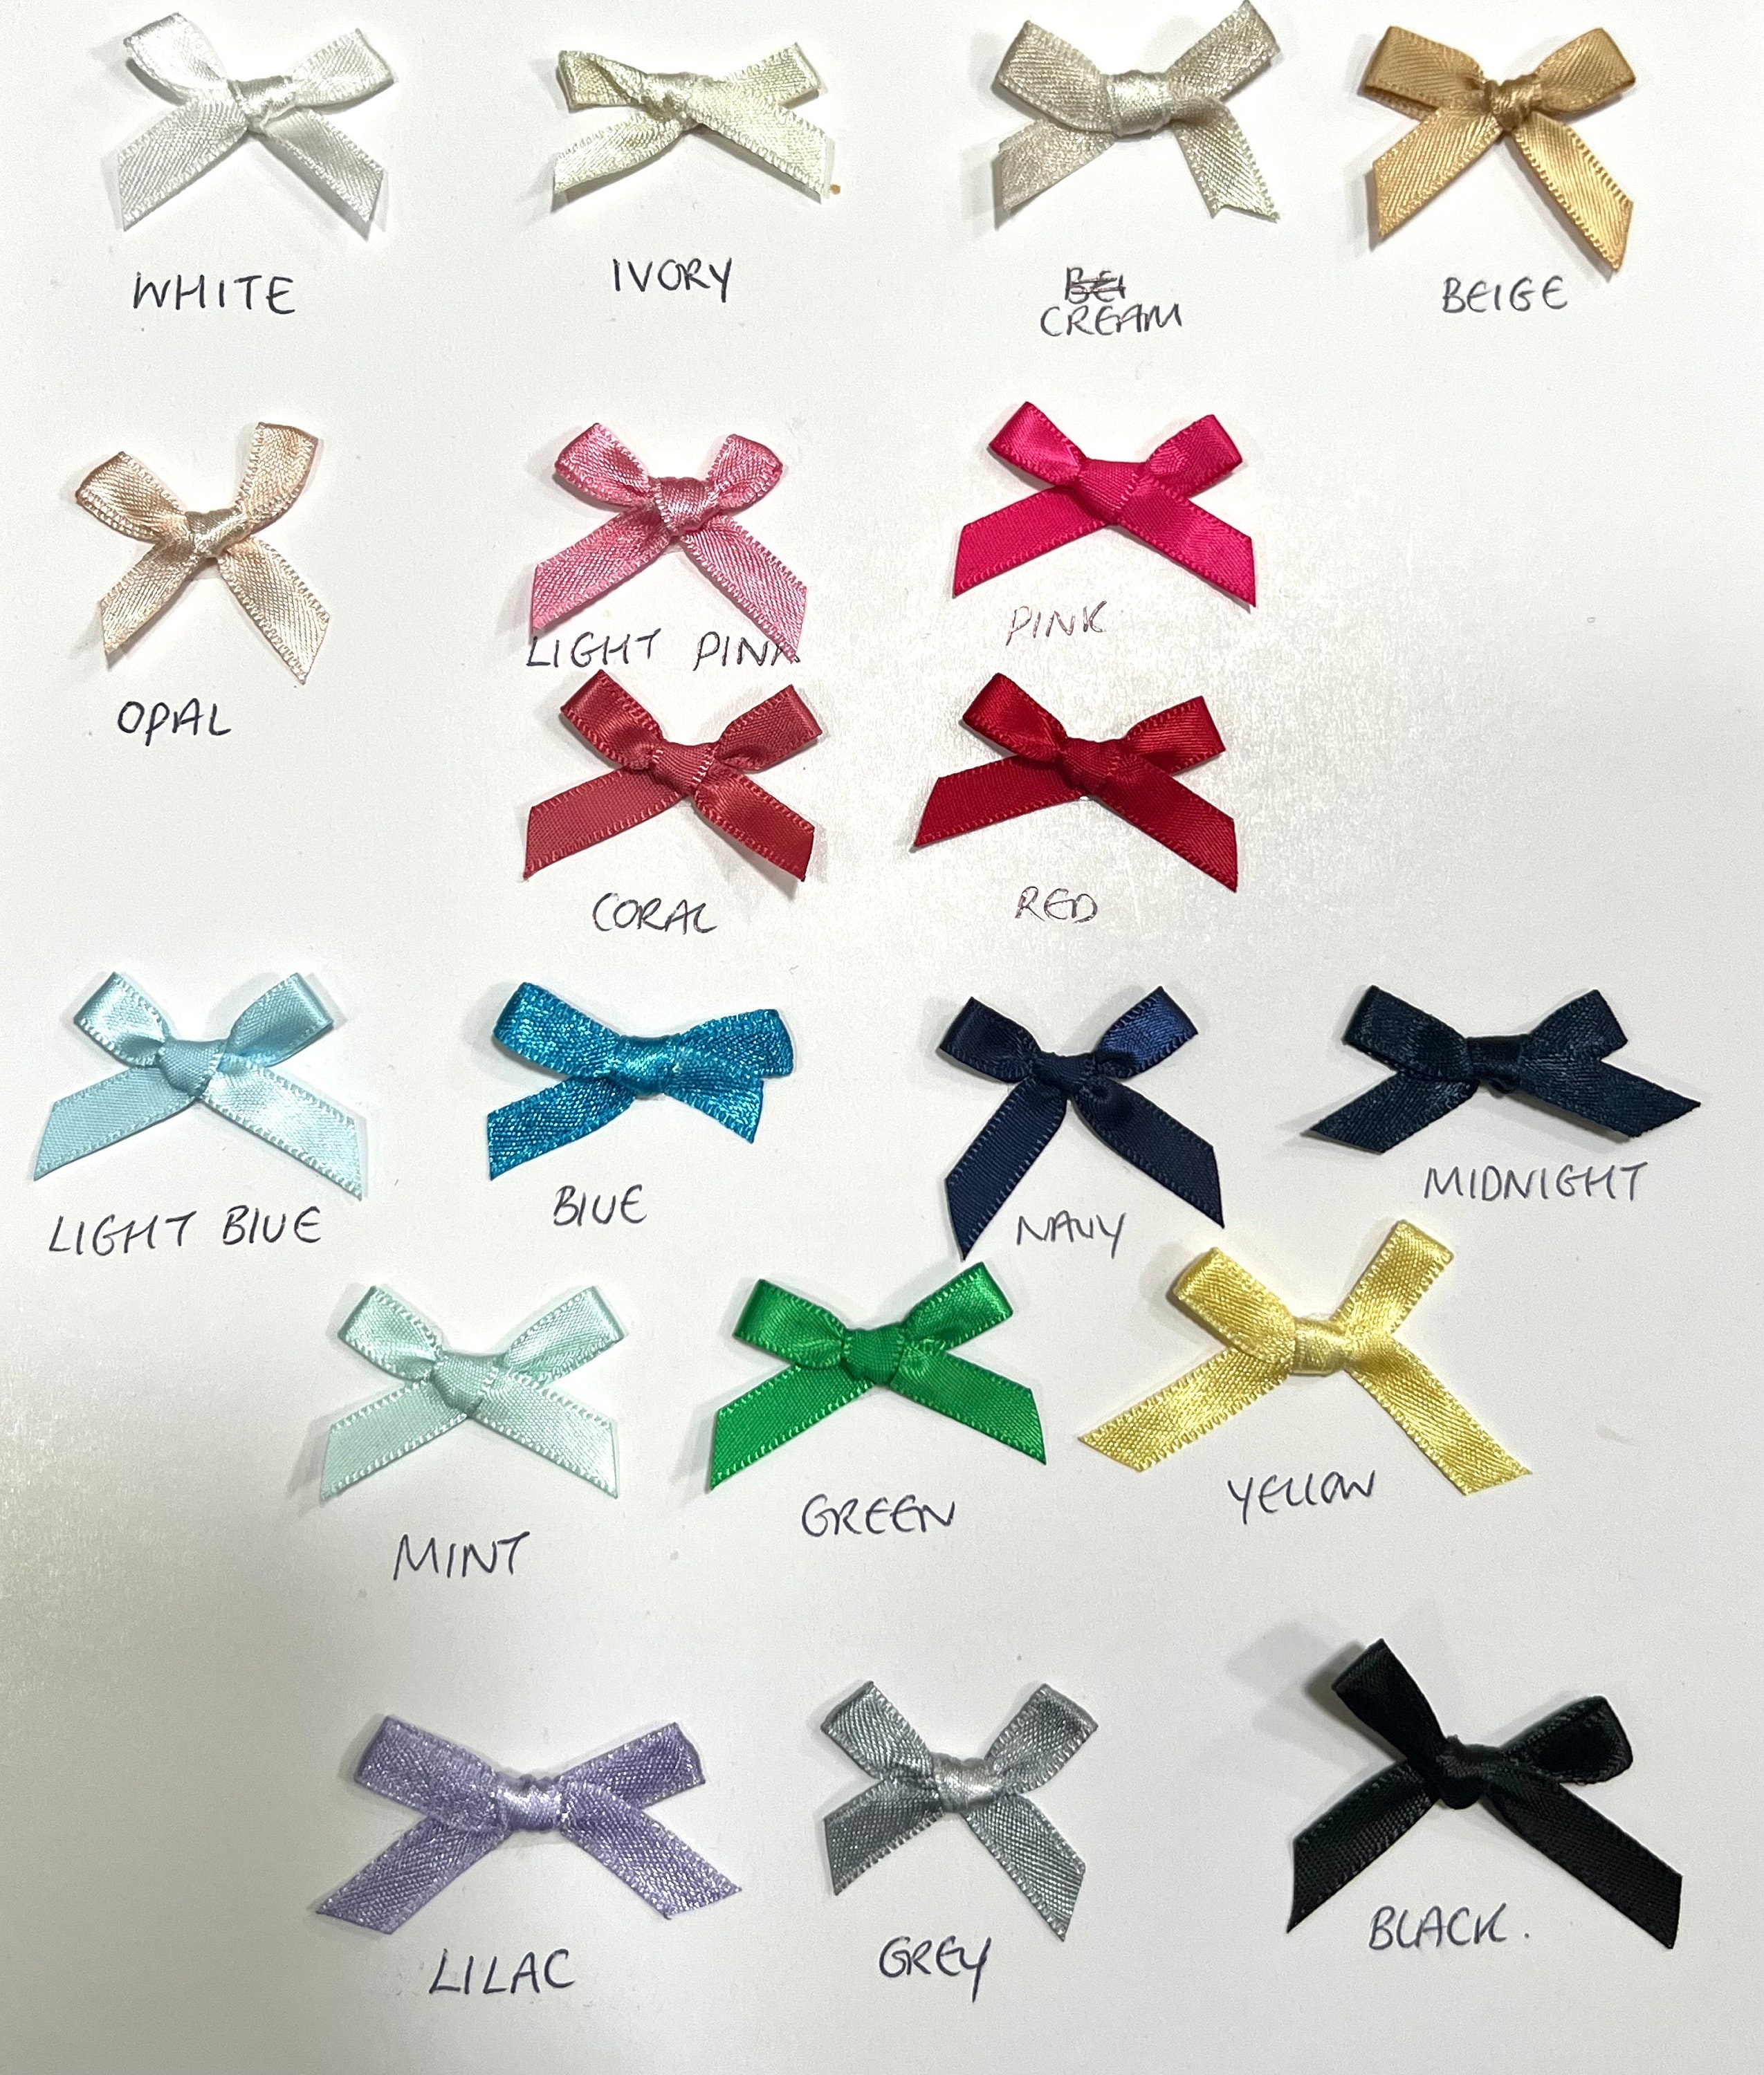 6pcs Quality Small Bows Lingerie Underwear Clothing Crafting 32mm26mm, 6mm Ribbon  Bows, Bows, Small Bows 